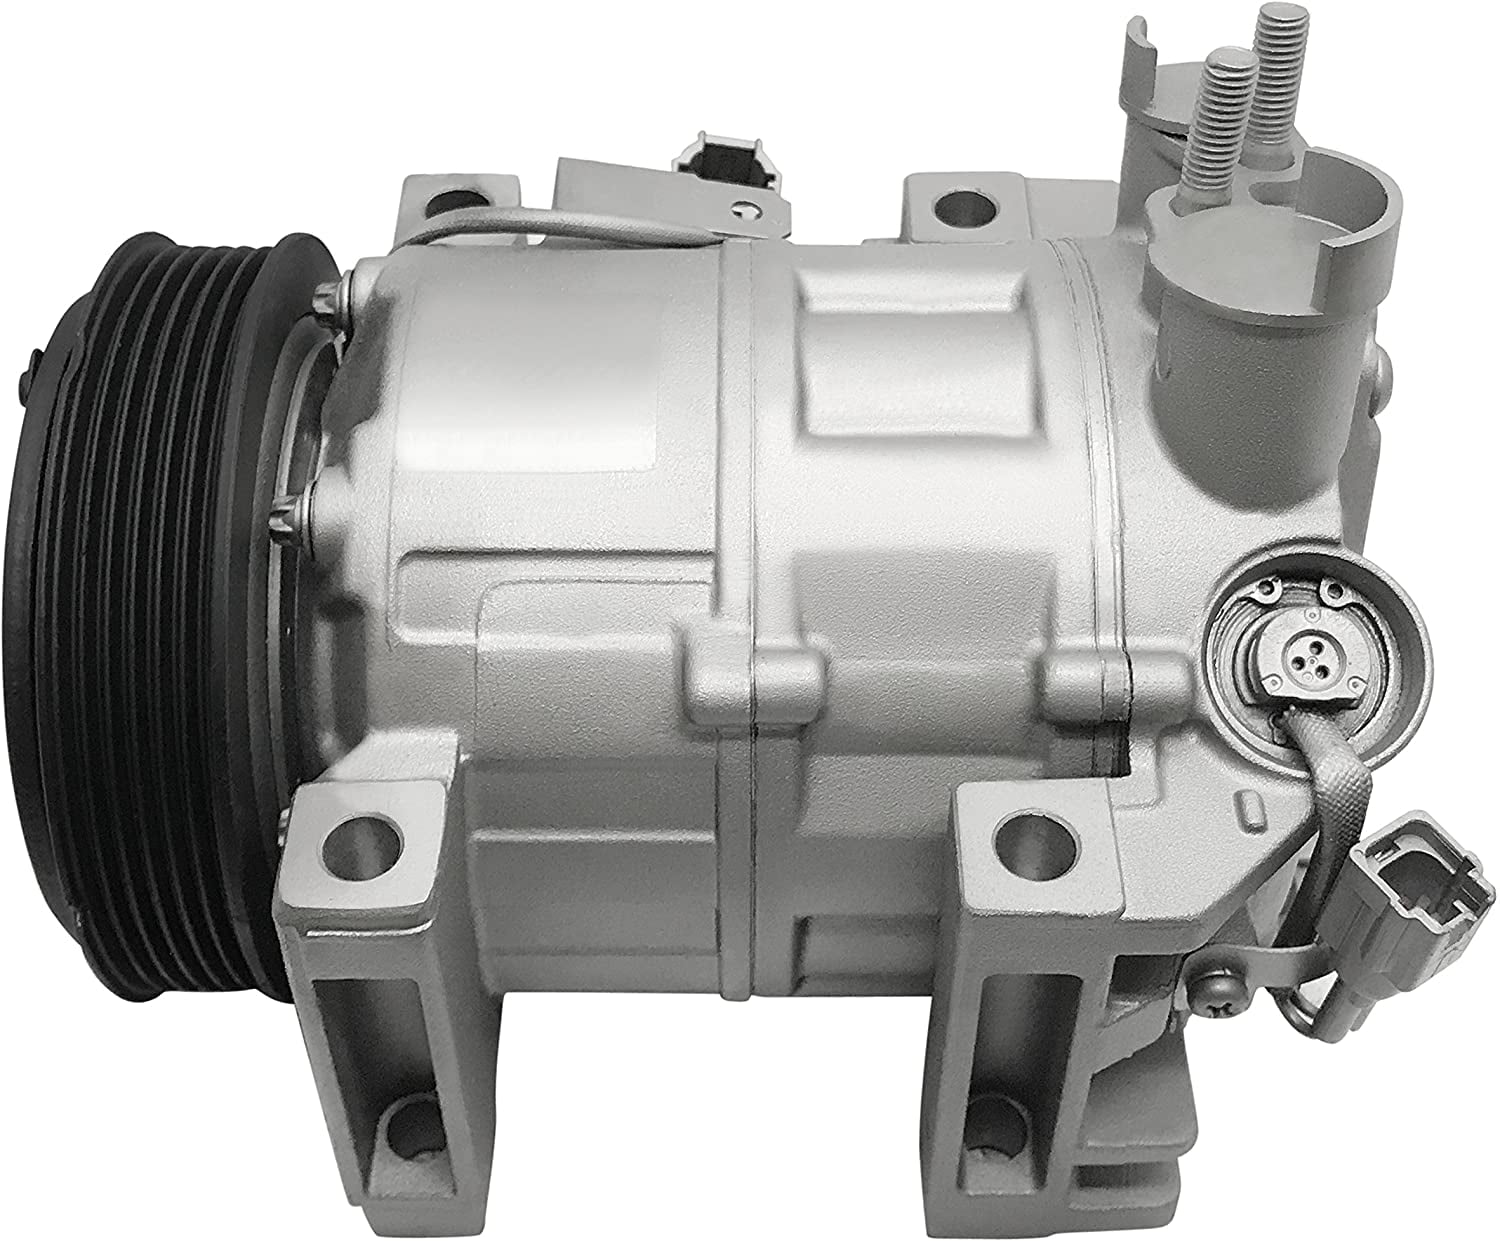 2002 Infiniti Q45 USA Remanufactured A/C Compressor Kit with 1 year  Warranty.